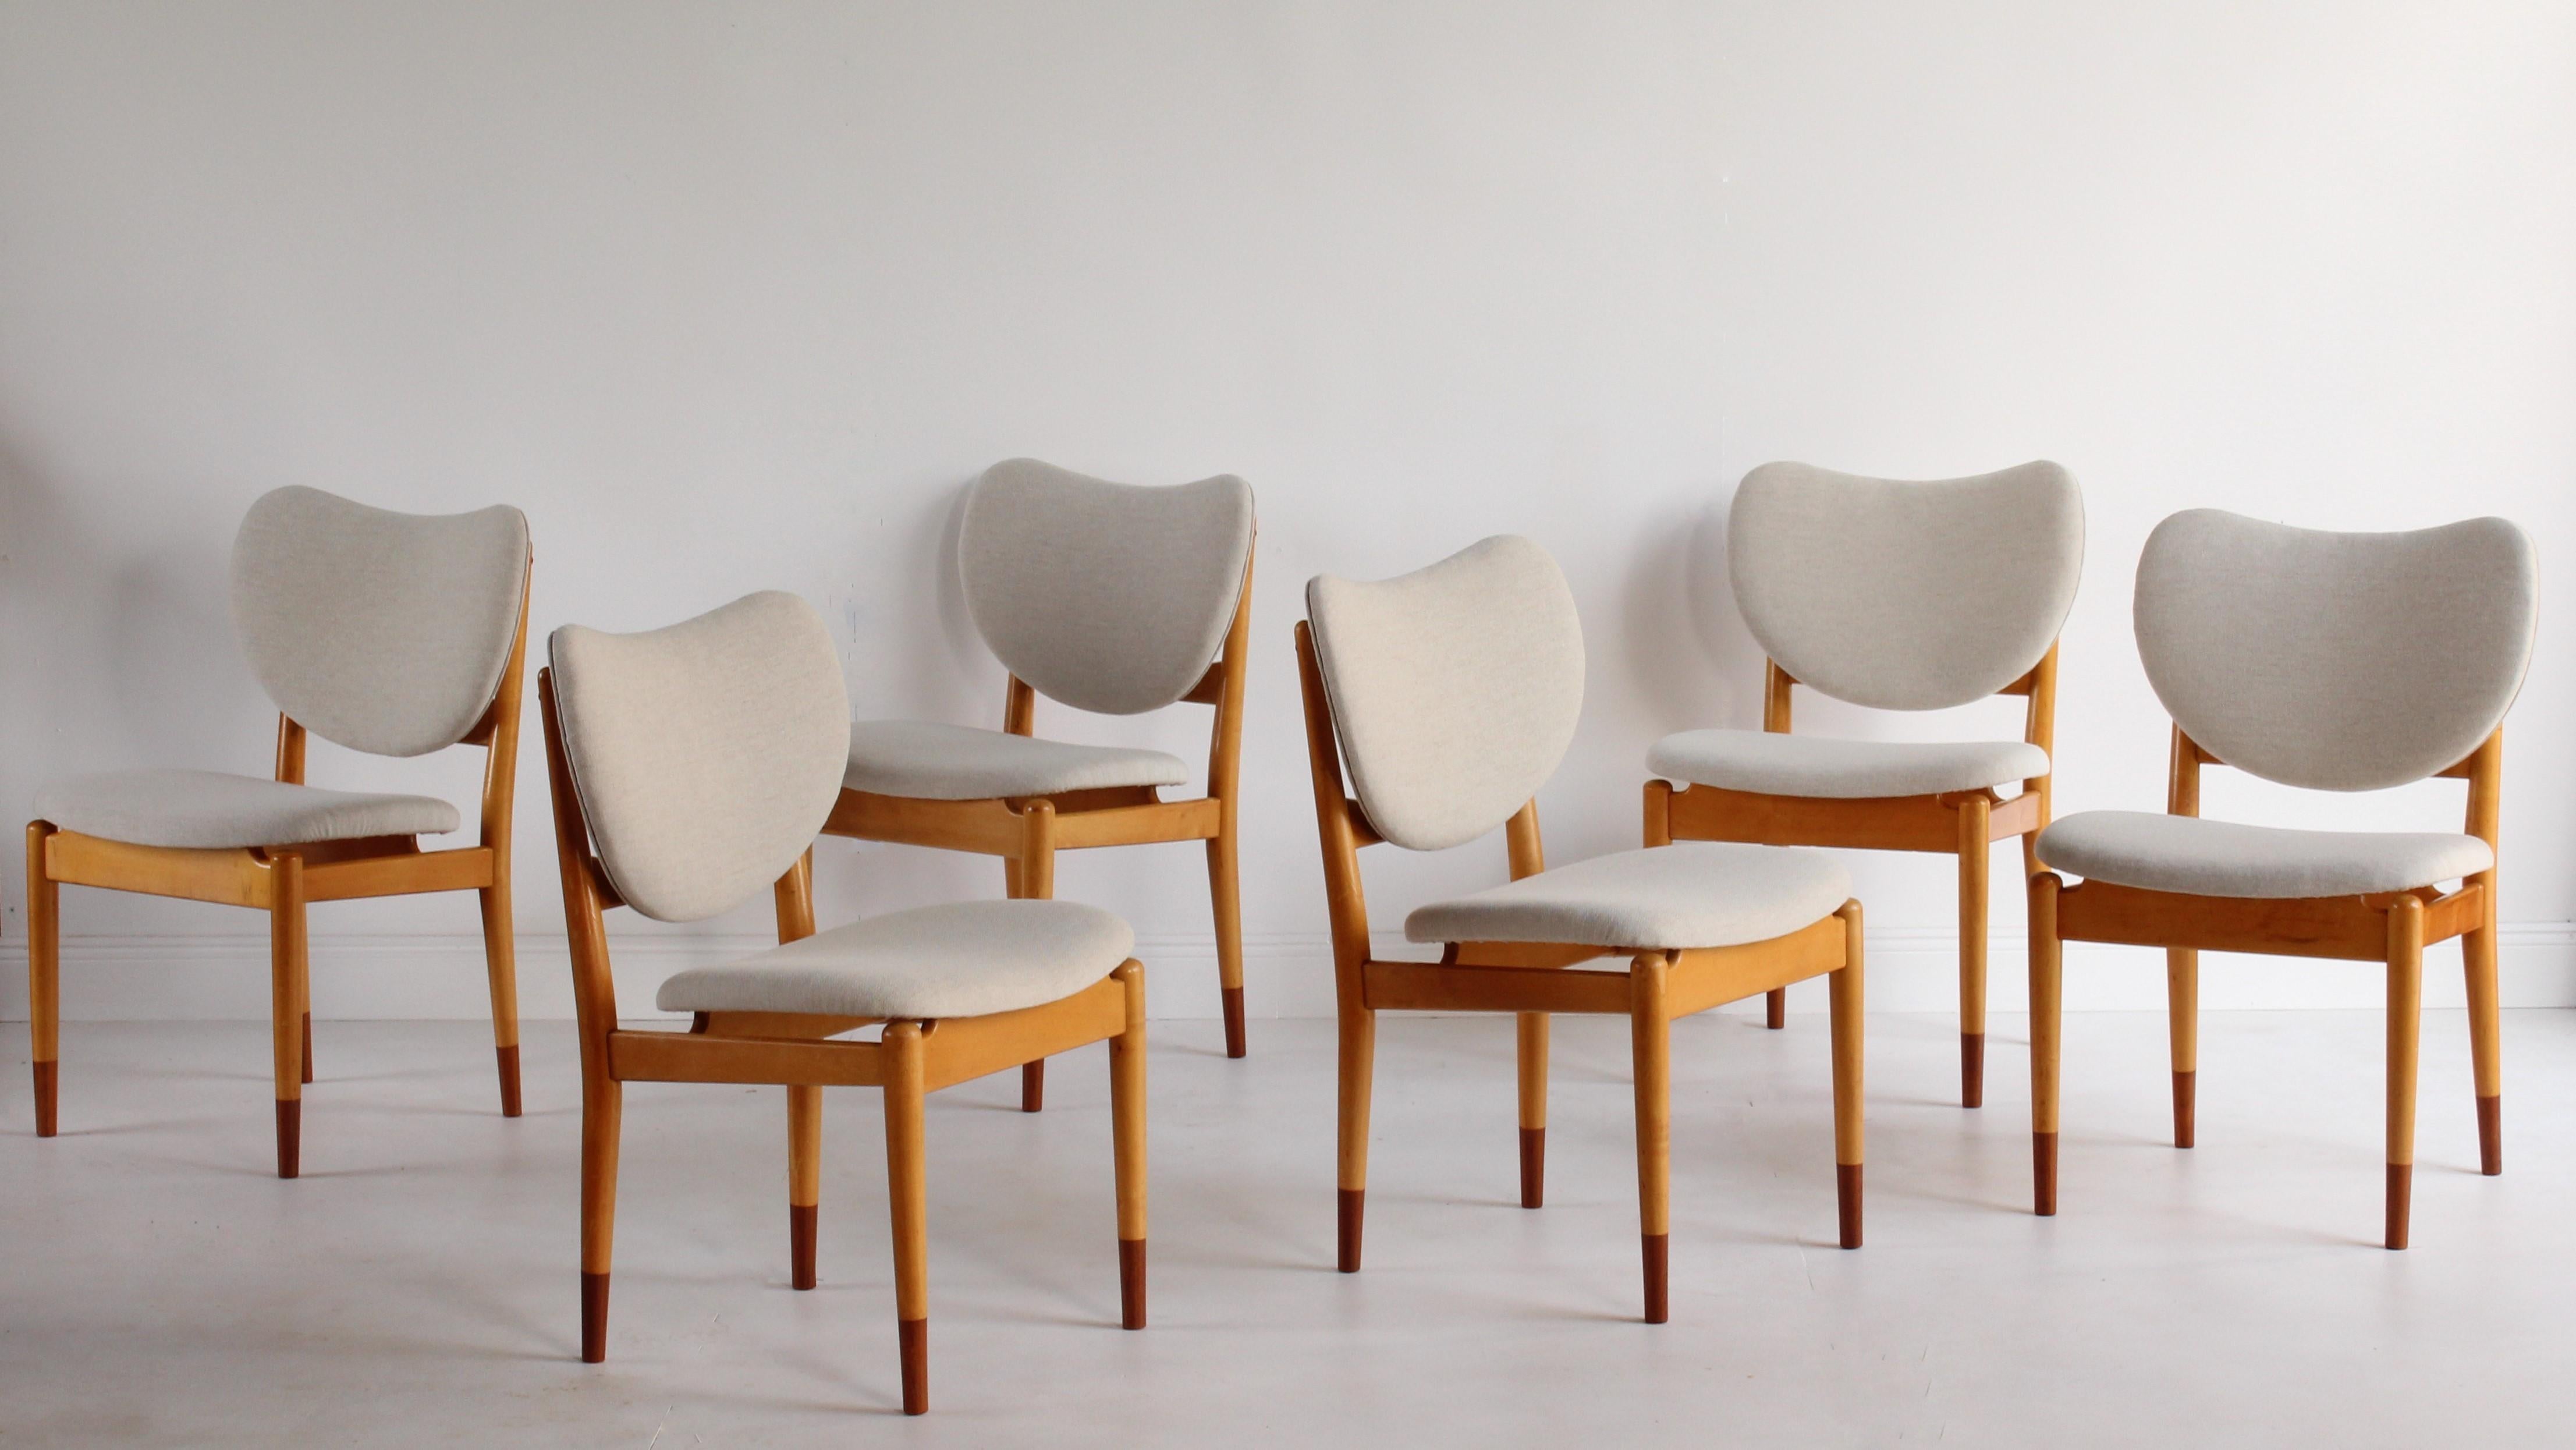 A rare dining group of six dining / side chairs designed by Finn Juhl and produced by Søren Willadsen Møbelfabrik. Executed in maple frames with teak feet, and upholstered in a light beige, high-end, Danish fabric. 

This rare design by Finn Juhl